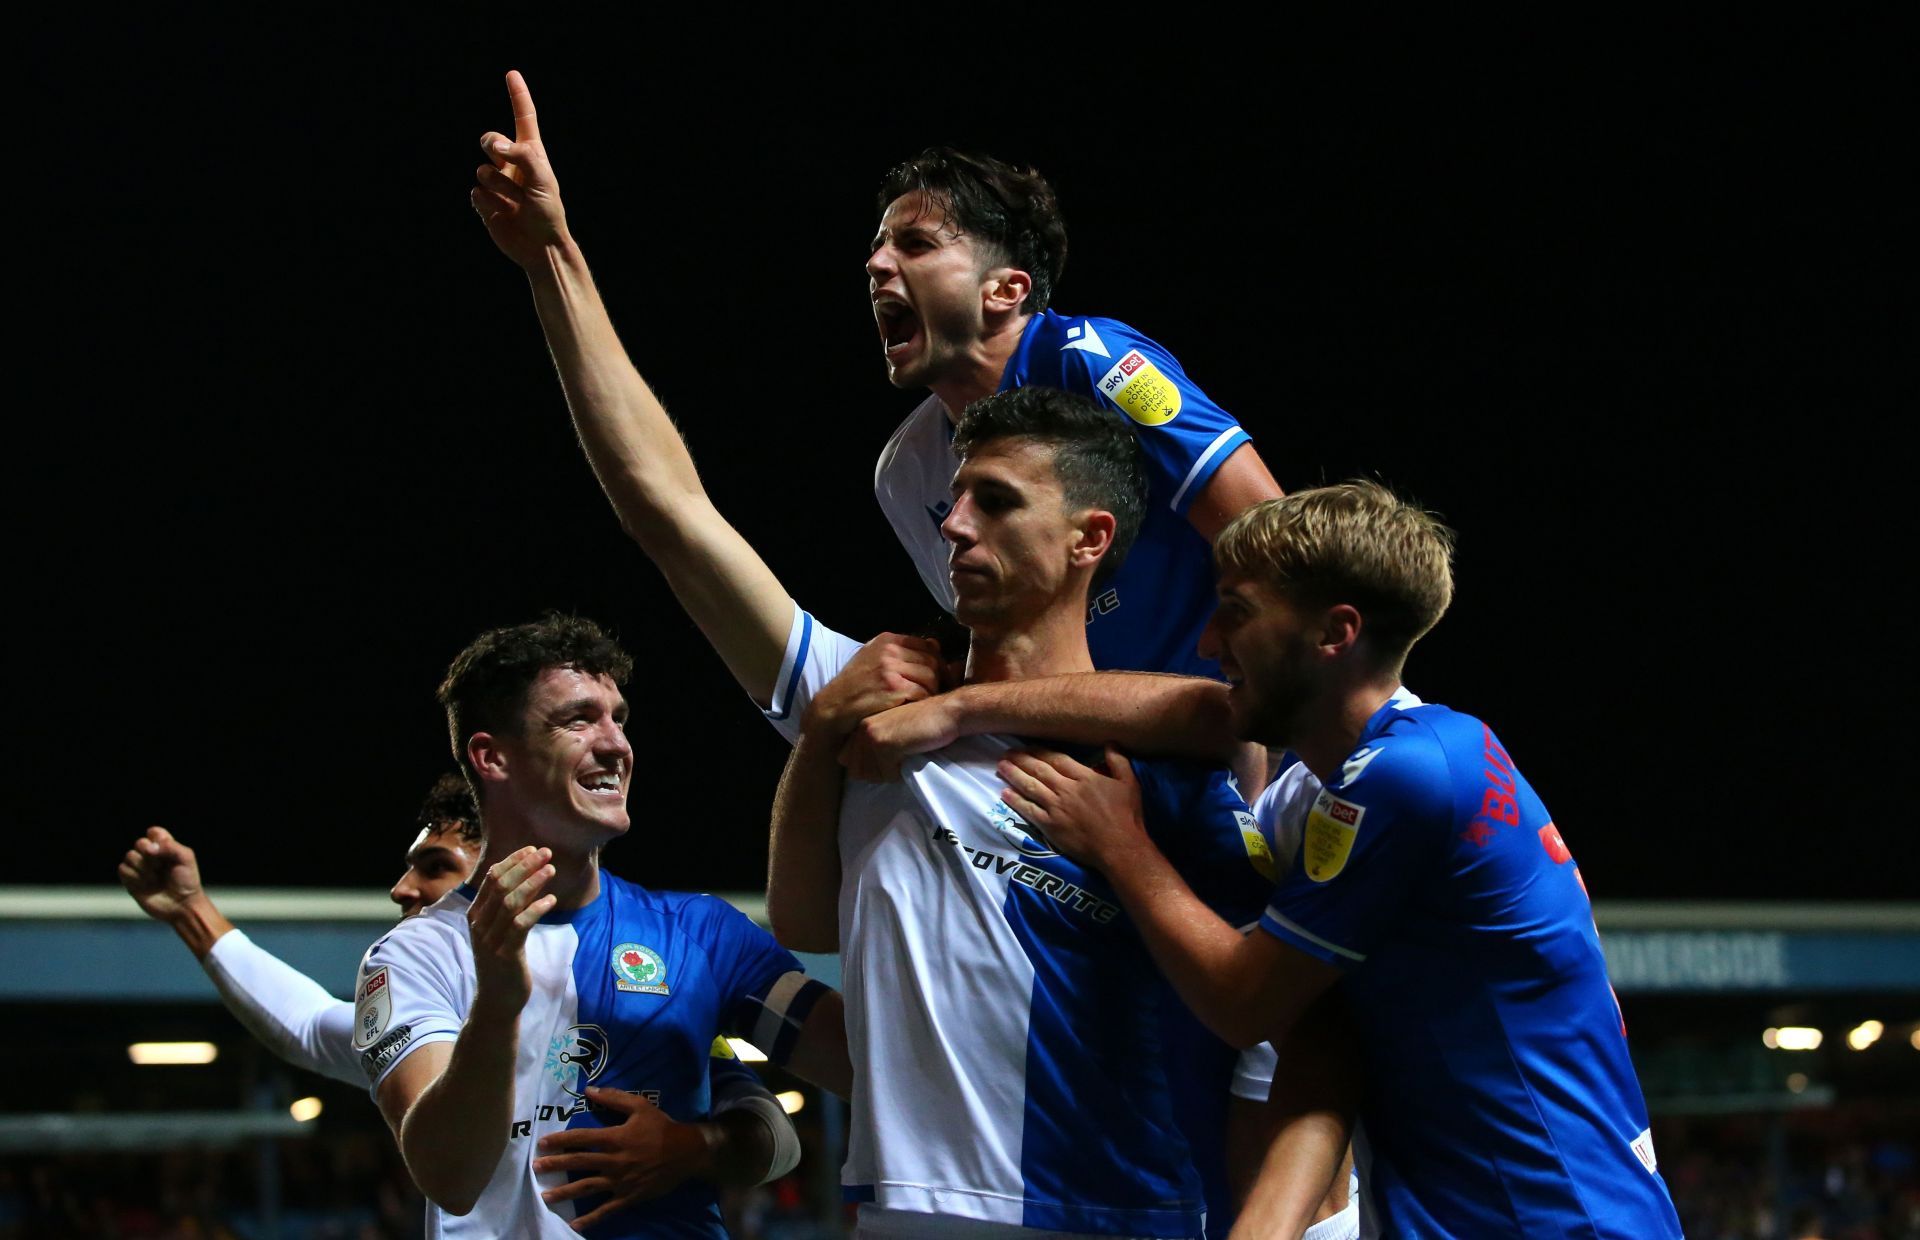 Blackburn Rovers will welcome Coventry City on Saturday